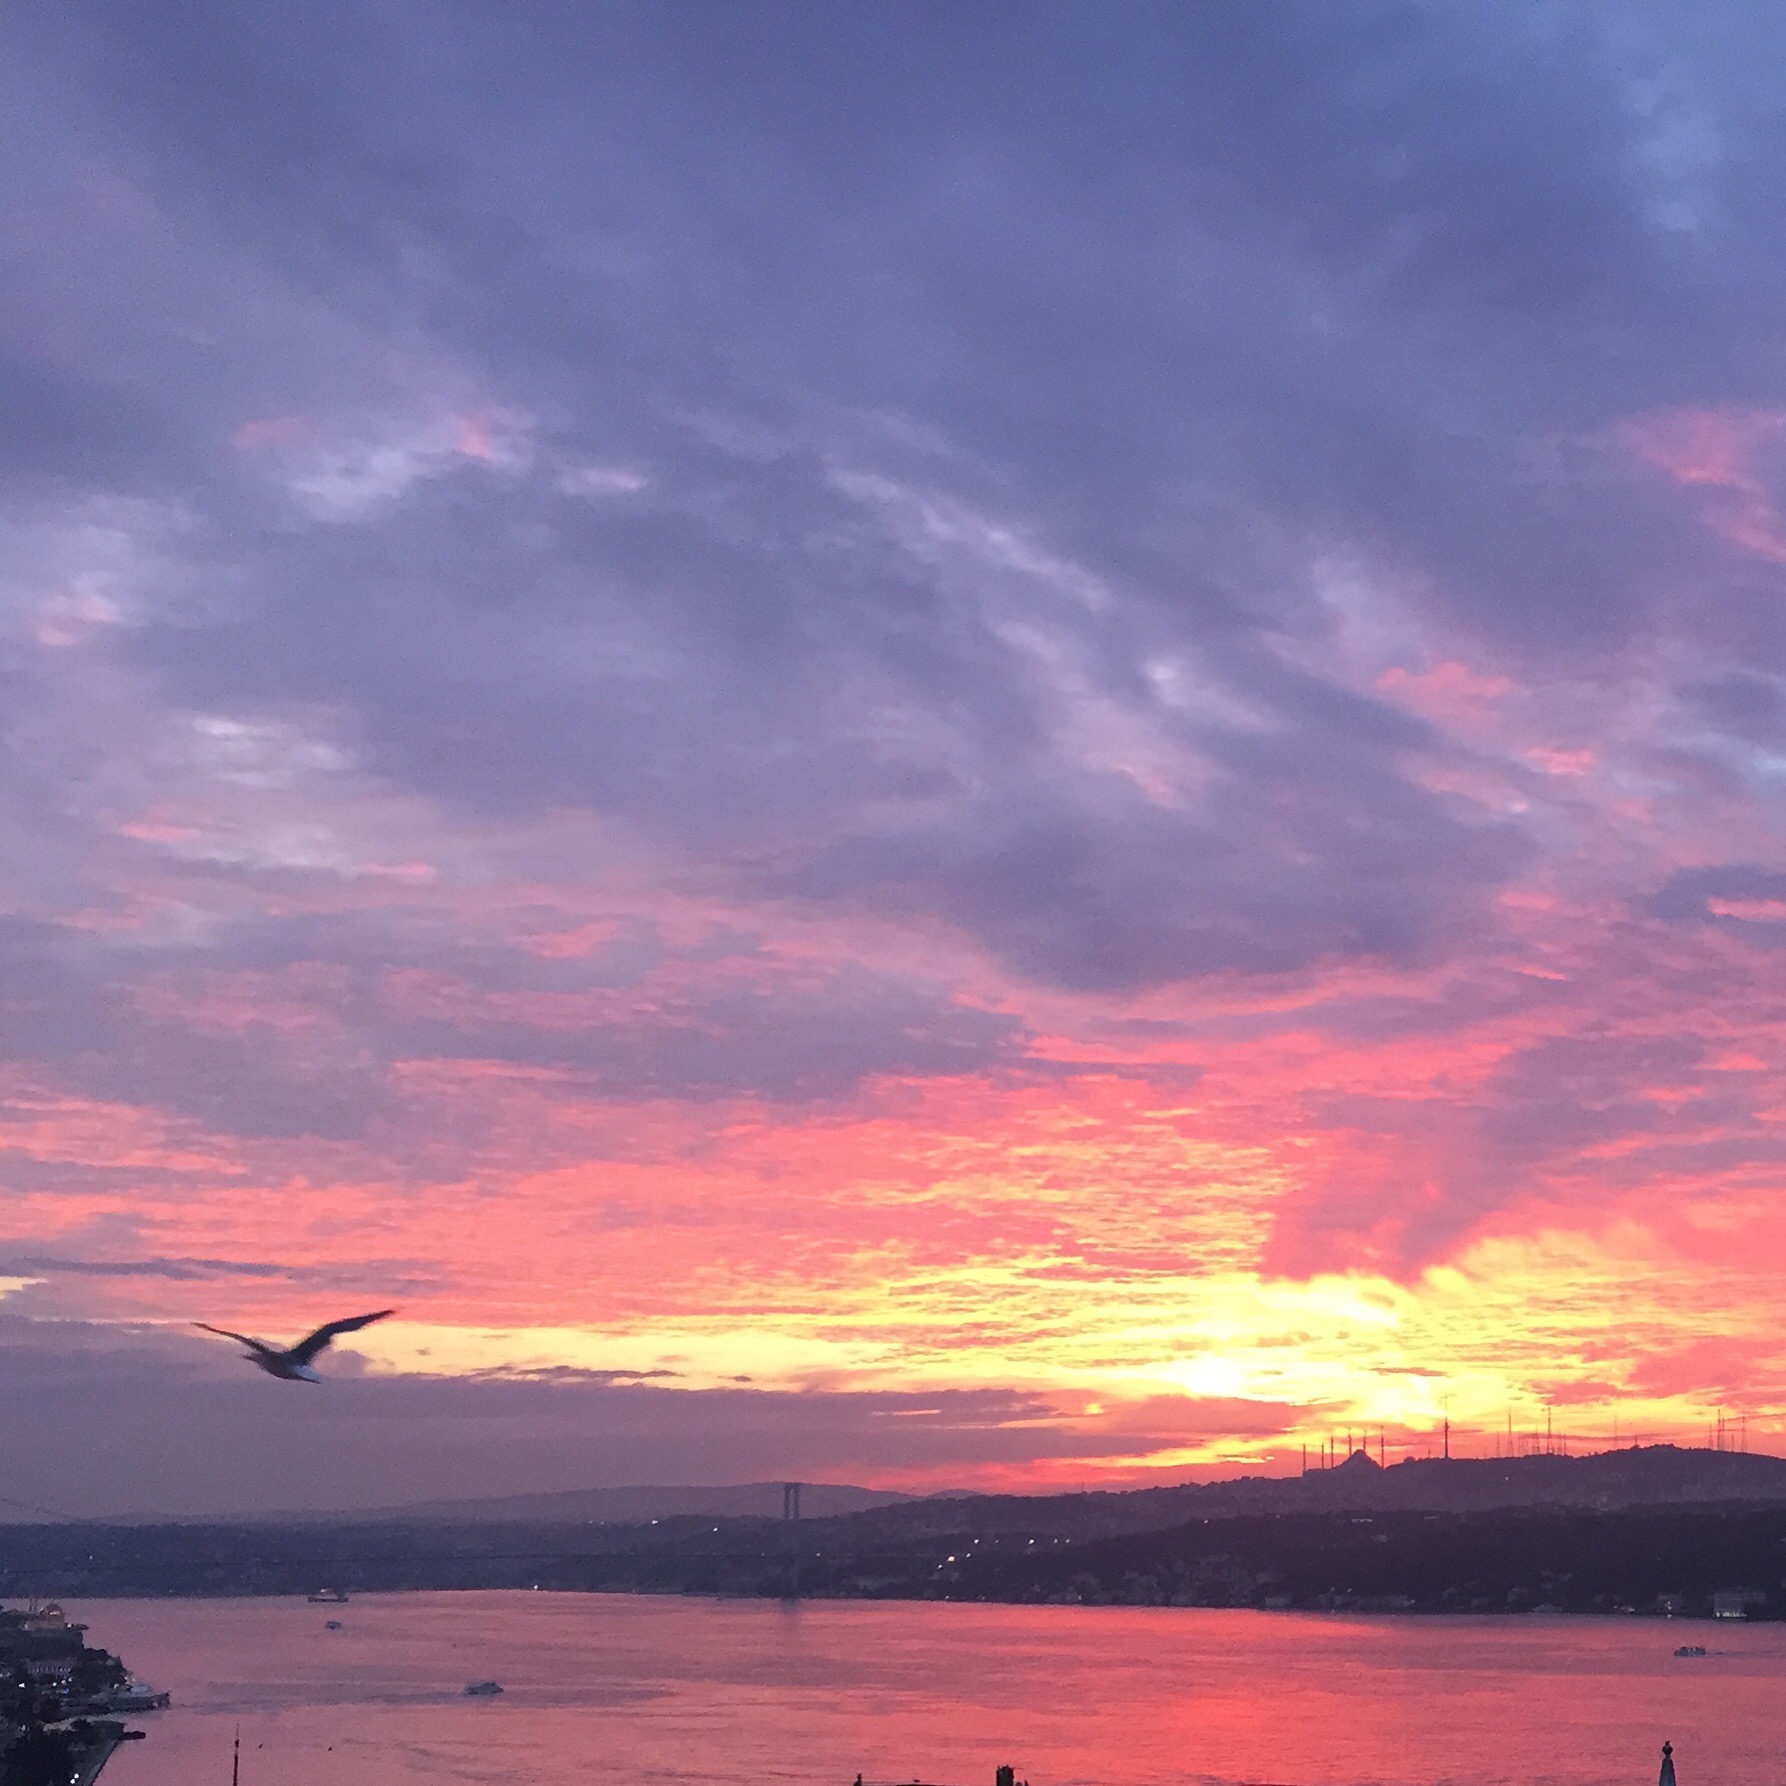 A Seagull Flies In The Bosphorus At Sunset